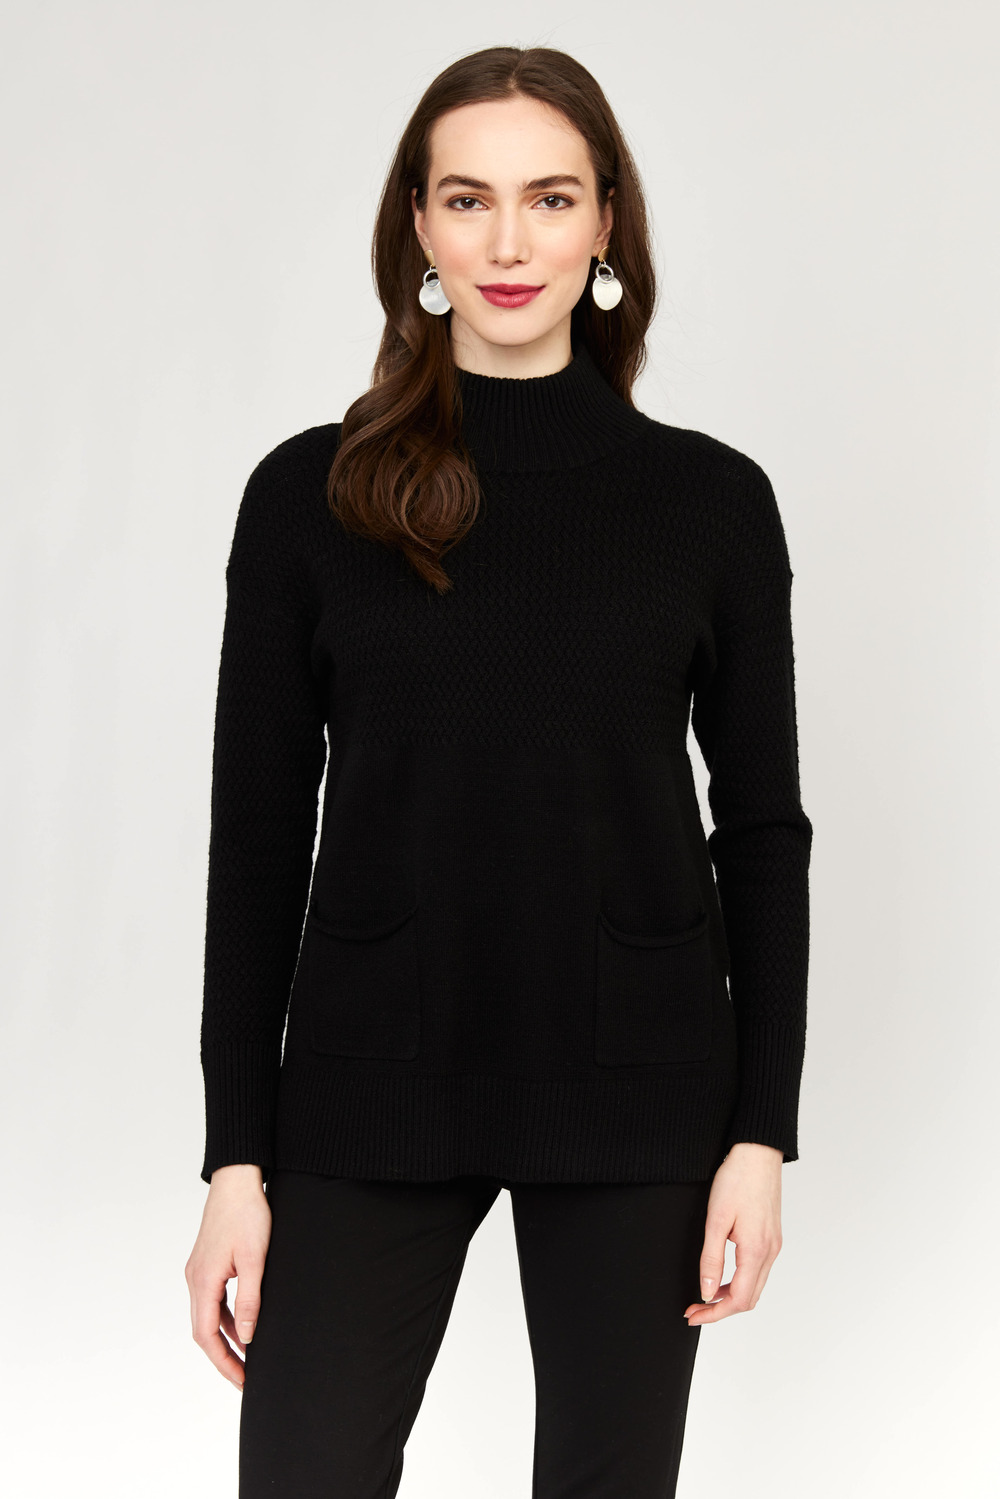 Alison Sheri Textured Knit Pocket Detail Sweater Style A42035